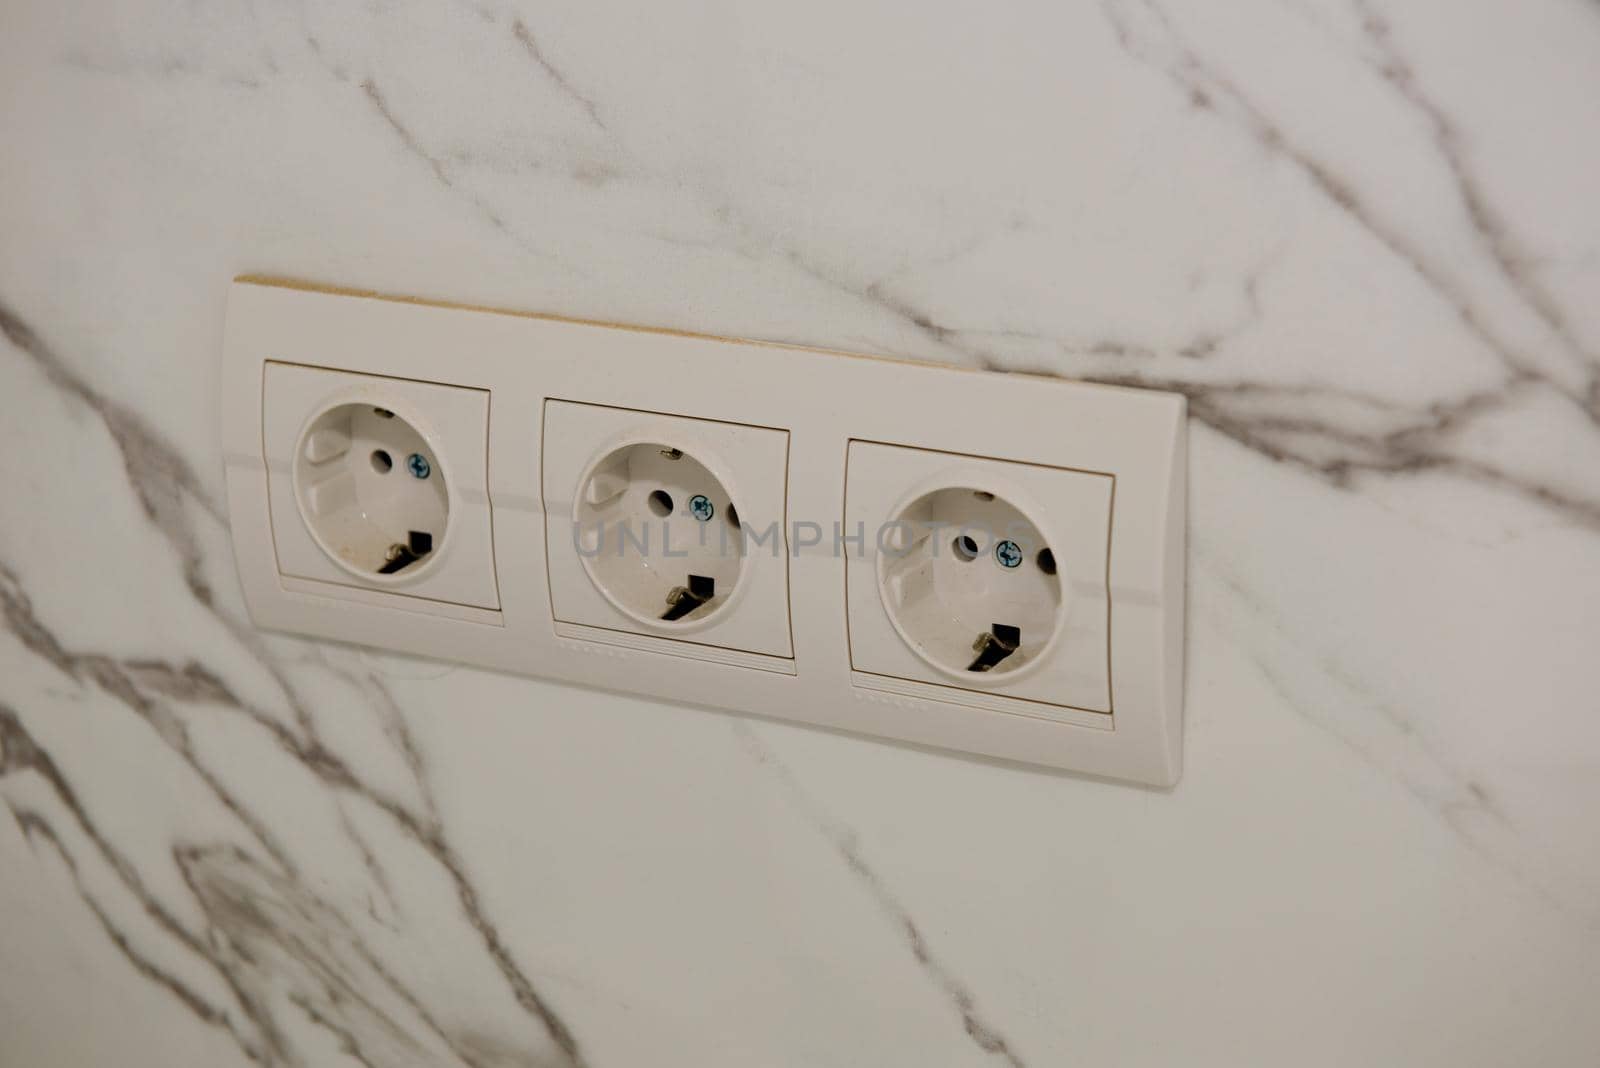 New socket installed on the tile. Close up. by leonik